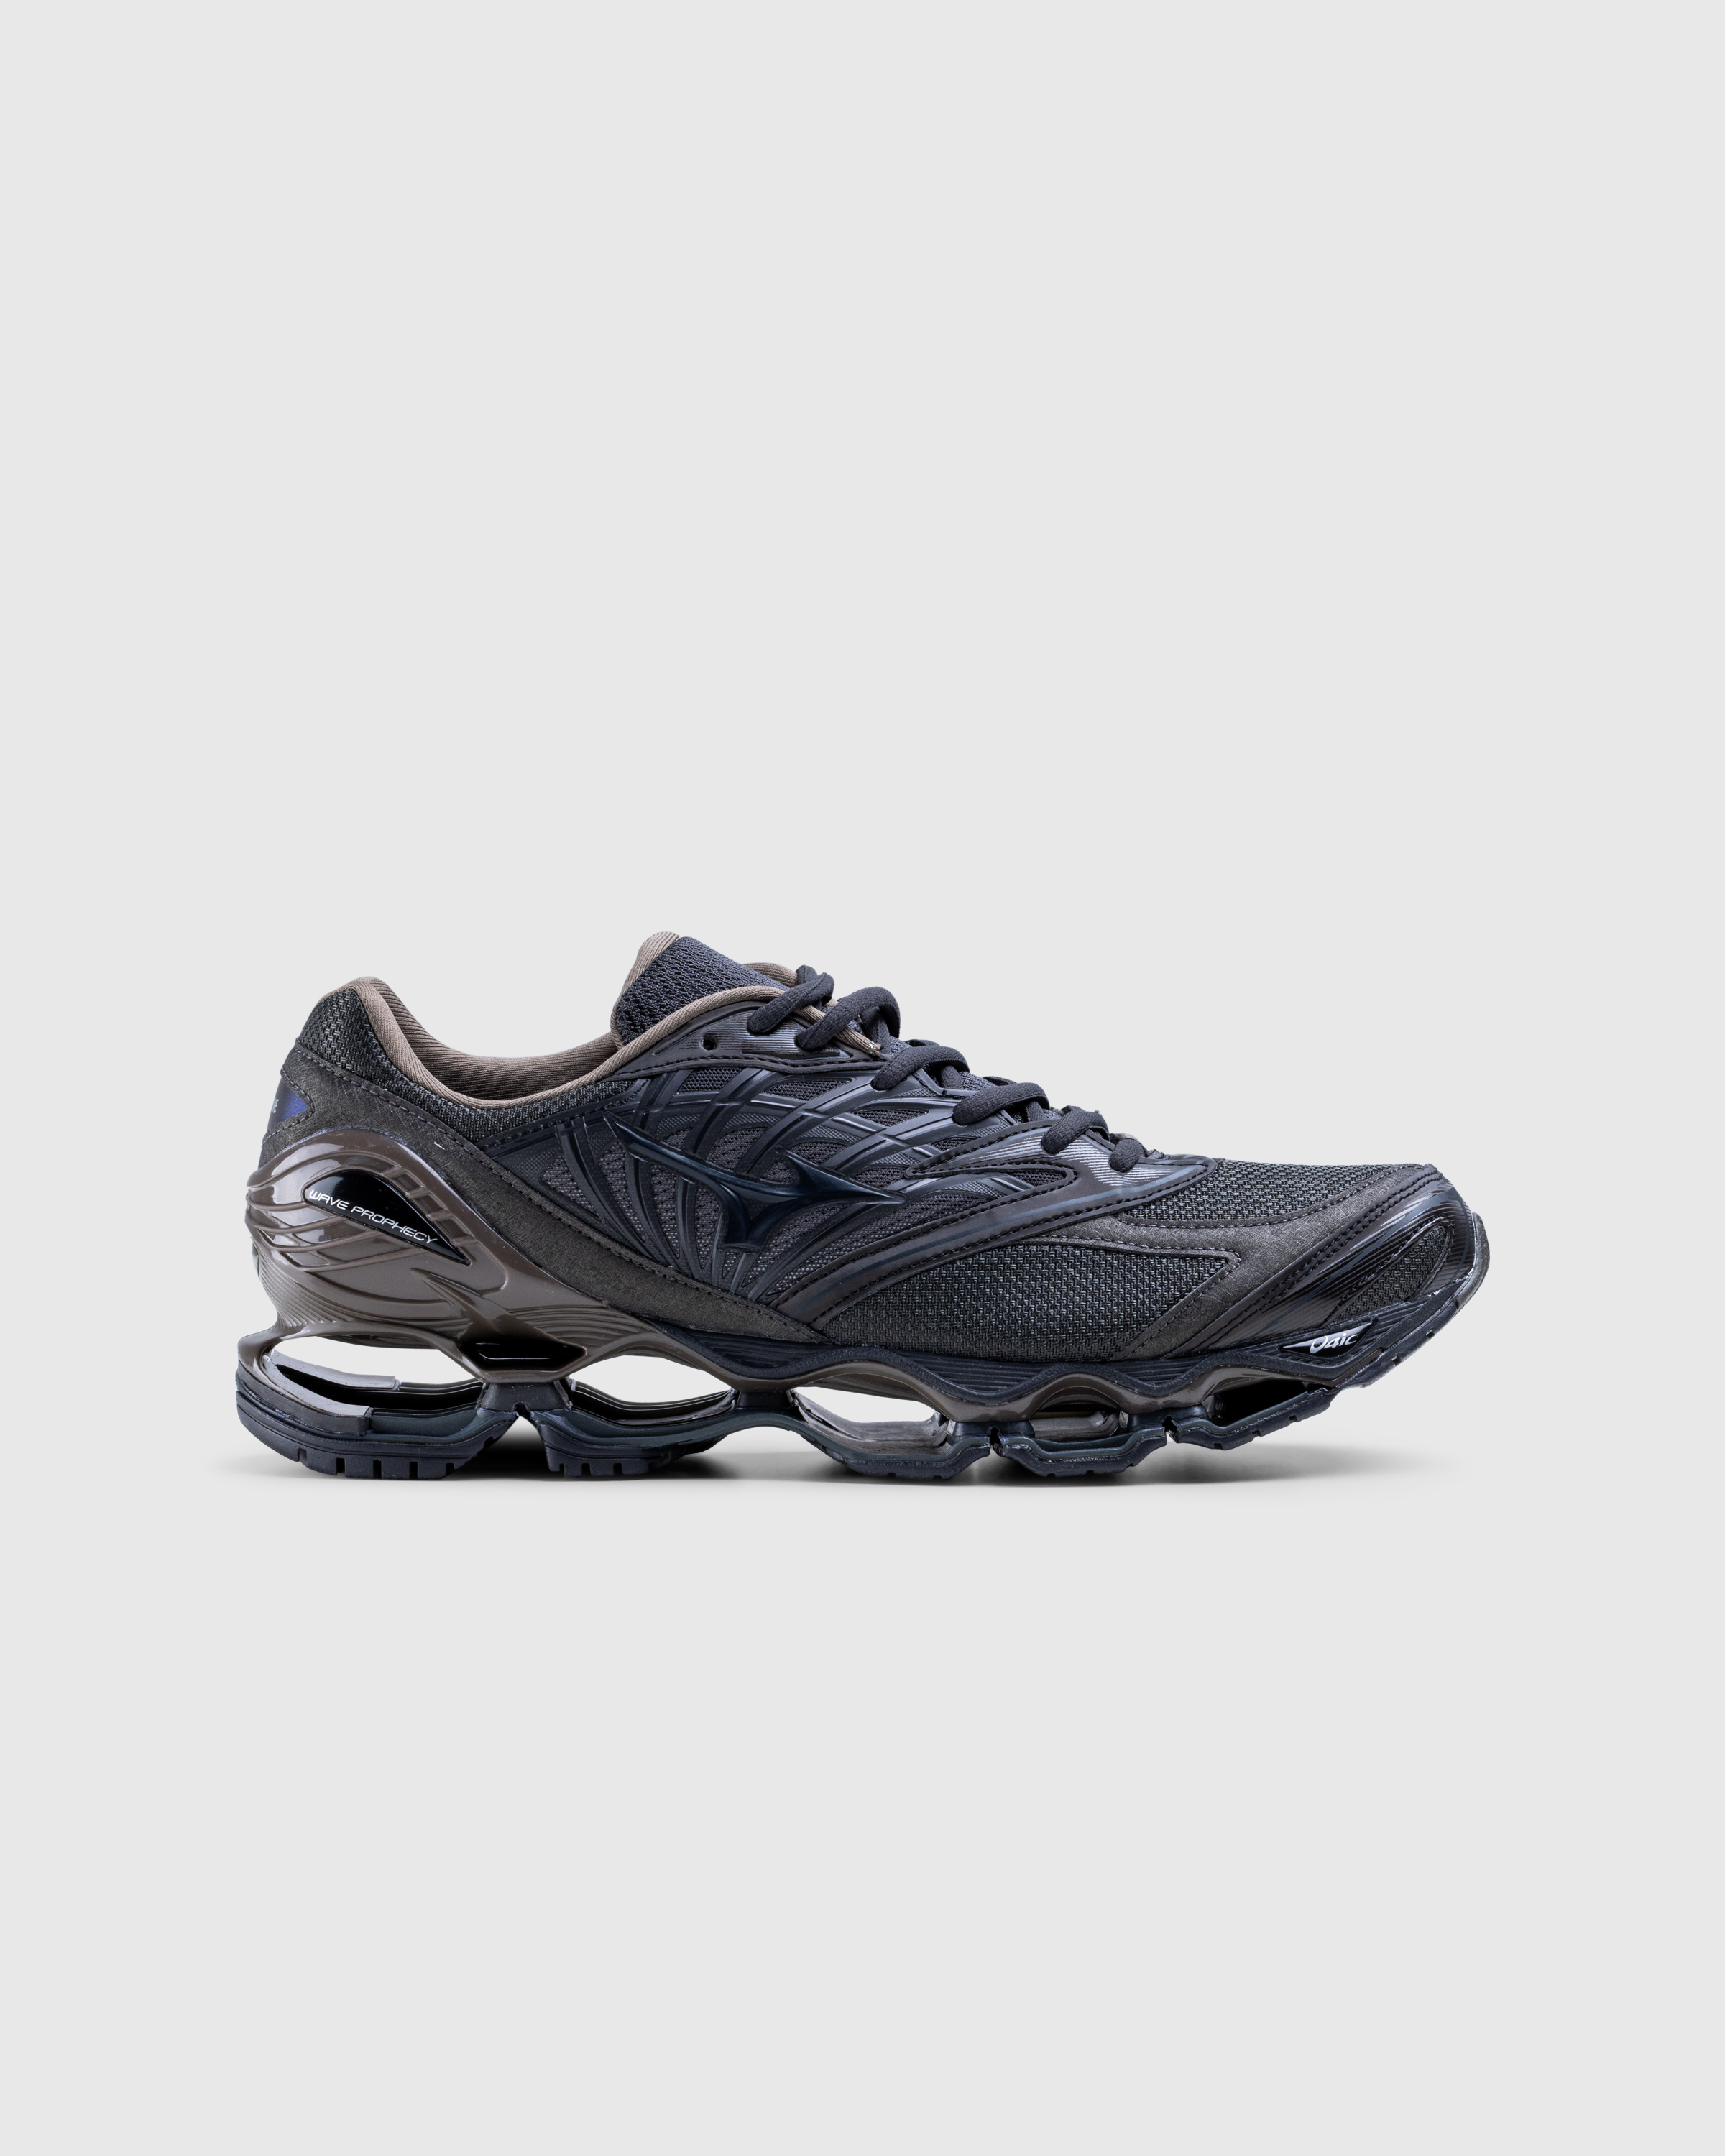 Mizuno – Wave Prophecy LS VAINL ARCHIVE Pirate Black/Chocolate Brown - Low Top Sneakers - Black - Image 1